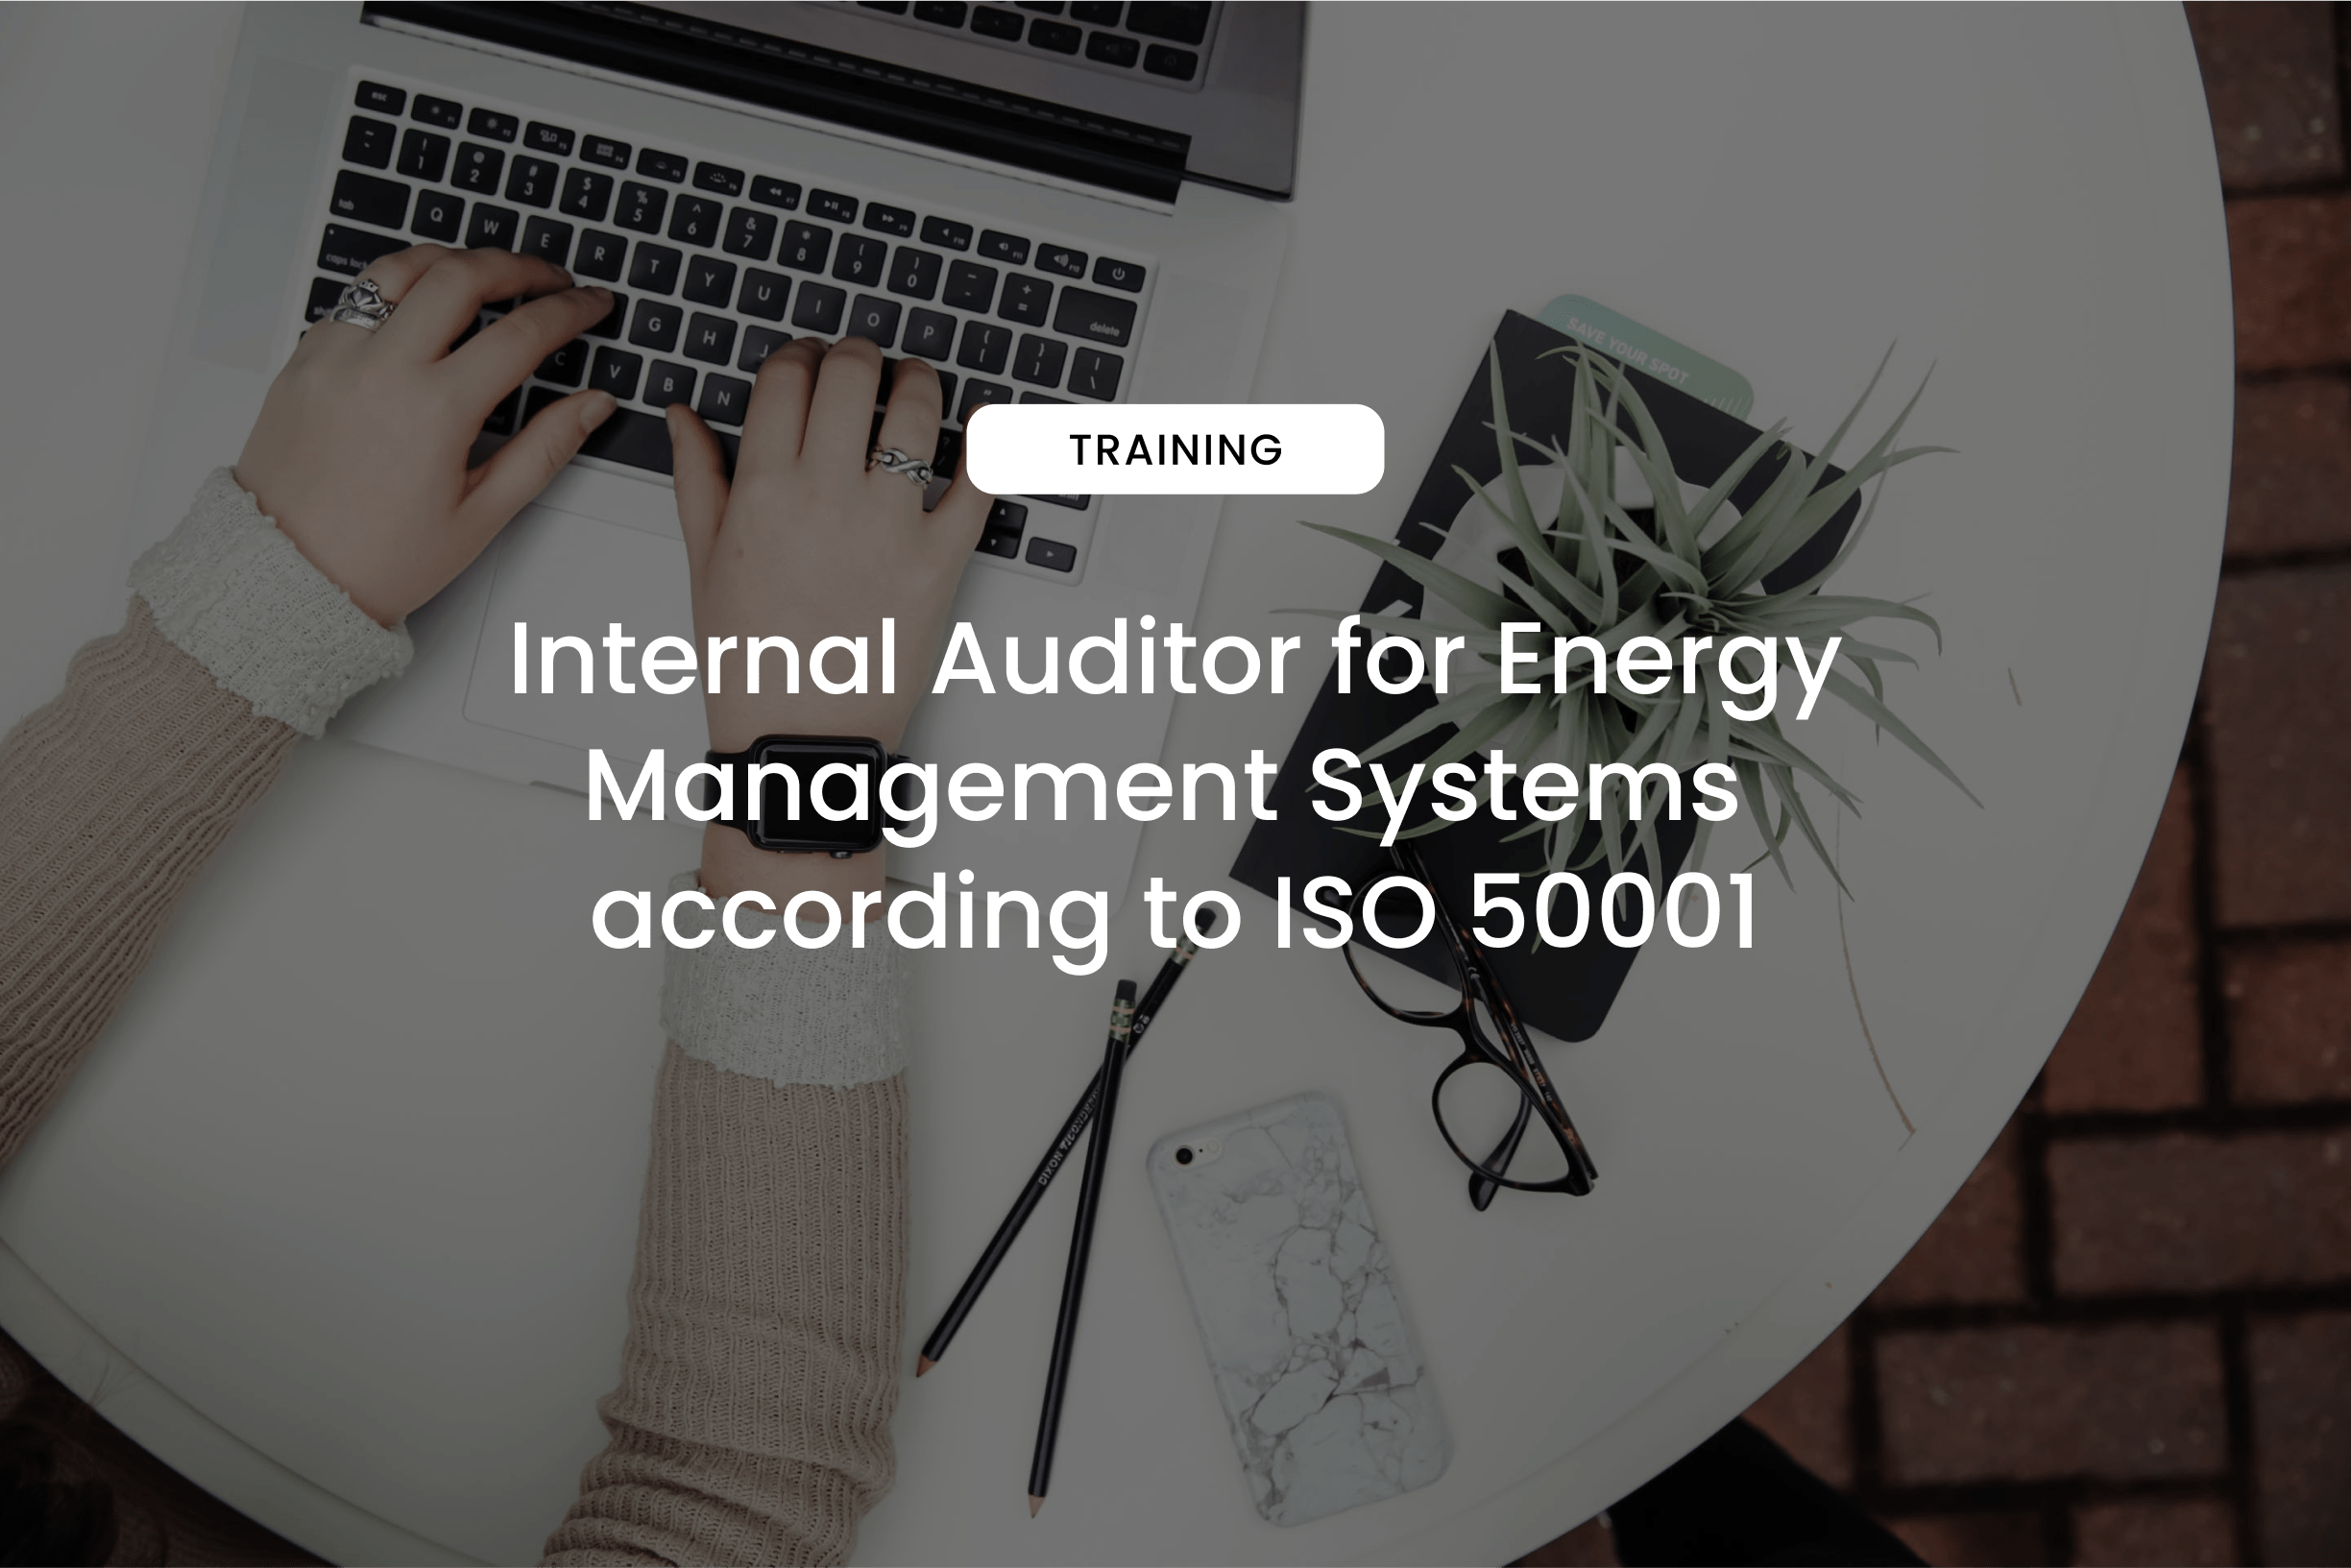 Internal Auditor for Energy Management Systems according to ISO 50001